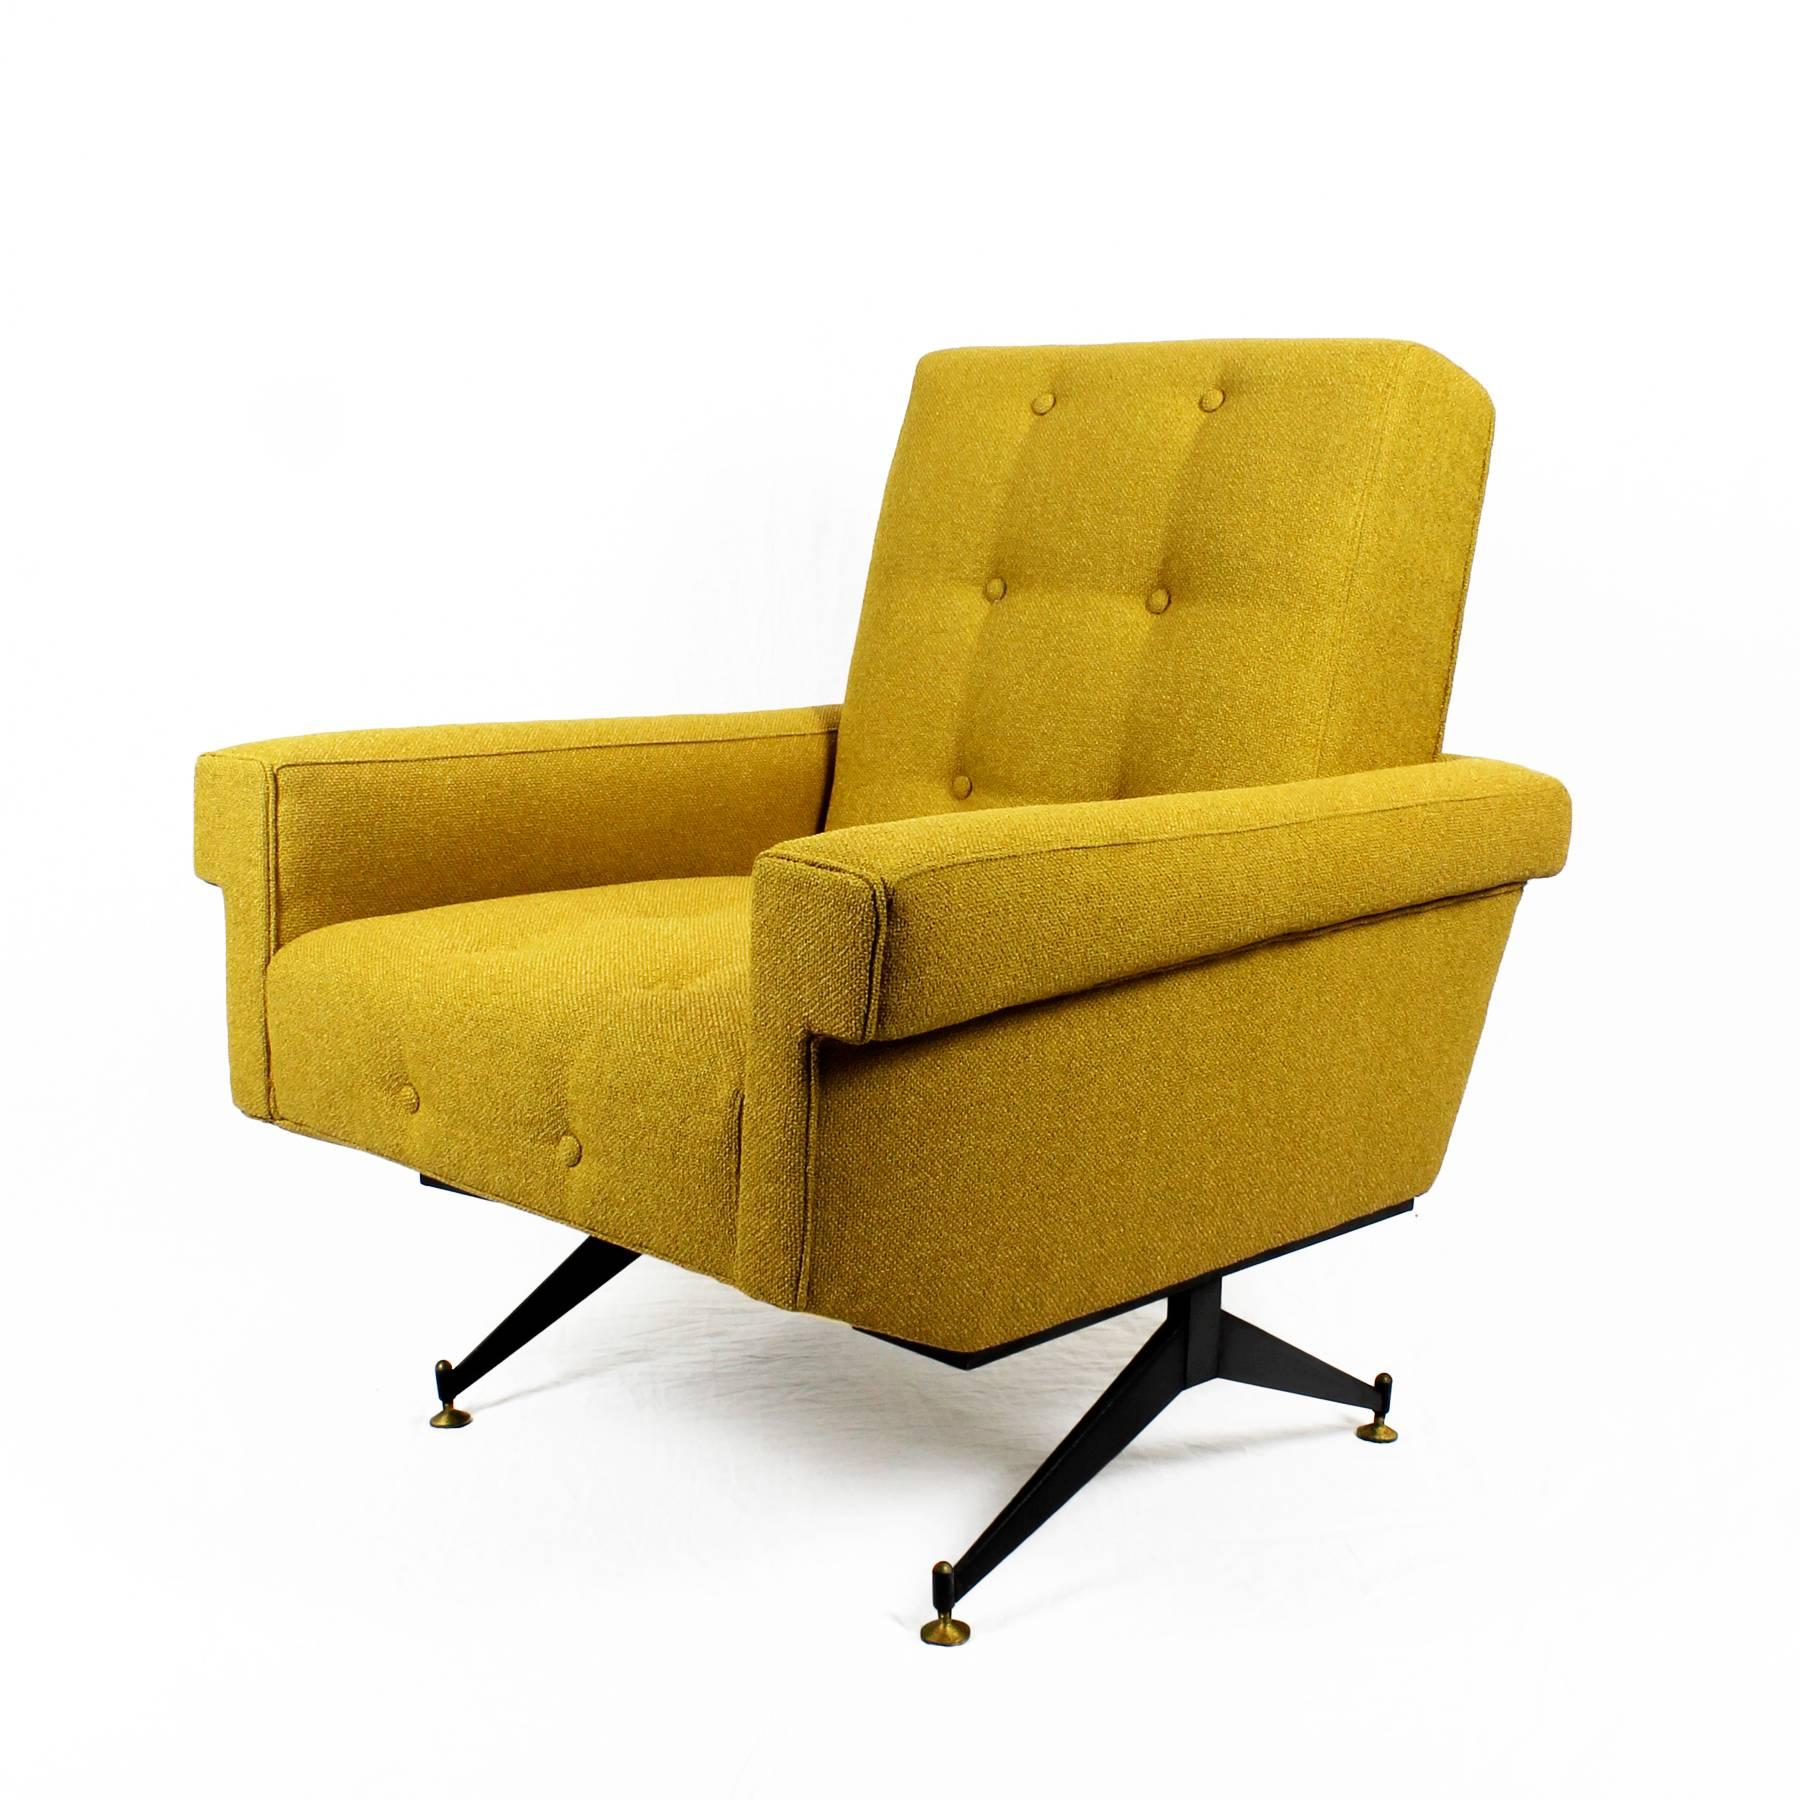 Mid-Century Modern 1960s Pair of Padded Armchairs, Yellow and Black, Steel, Upholstery, Italy